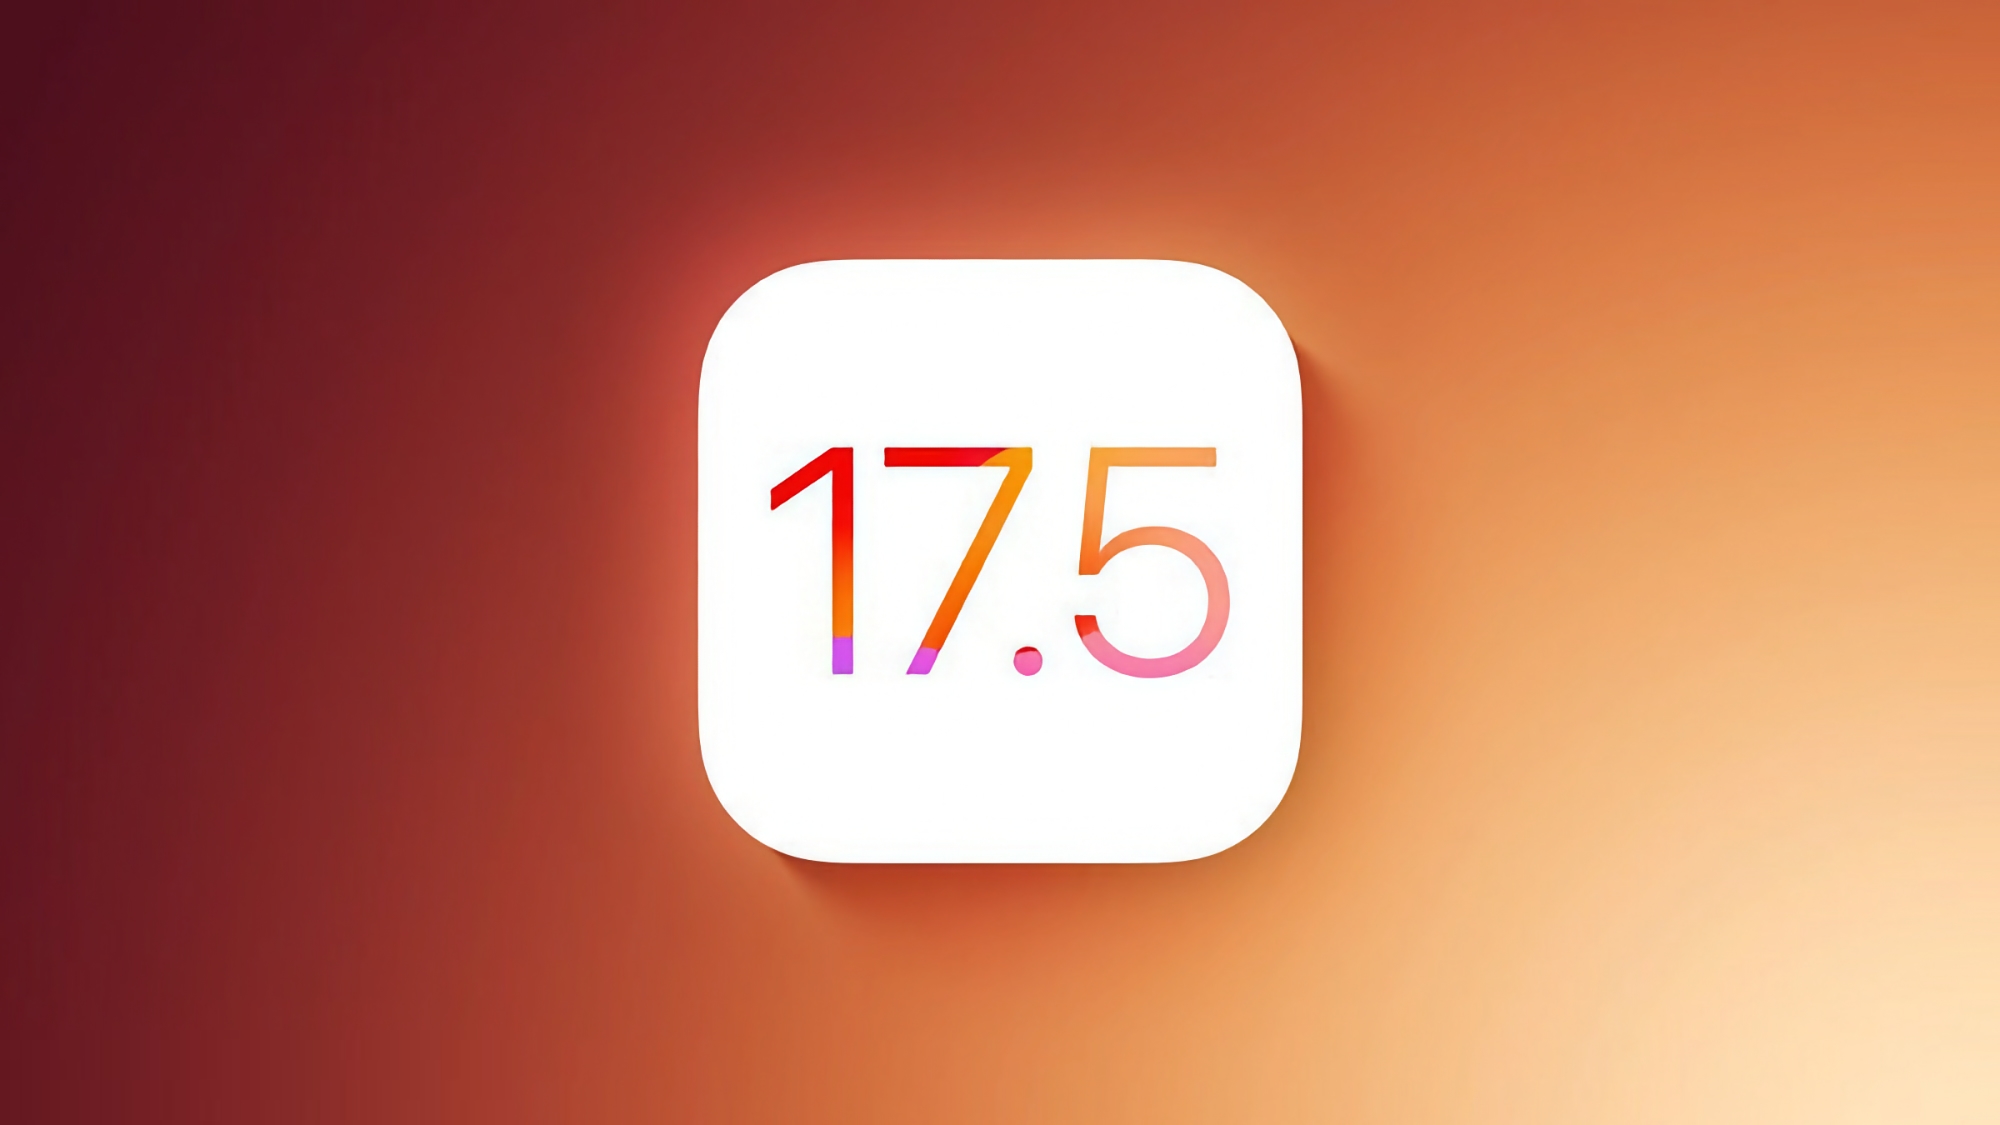 Apple has released new beta versions of iOS 17.5 and iPadOS 17.5 to developers